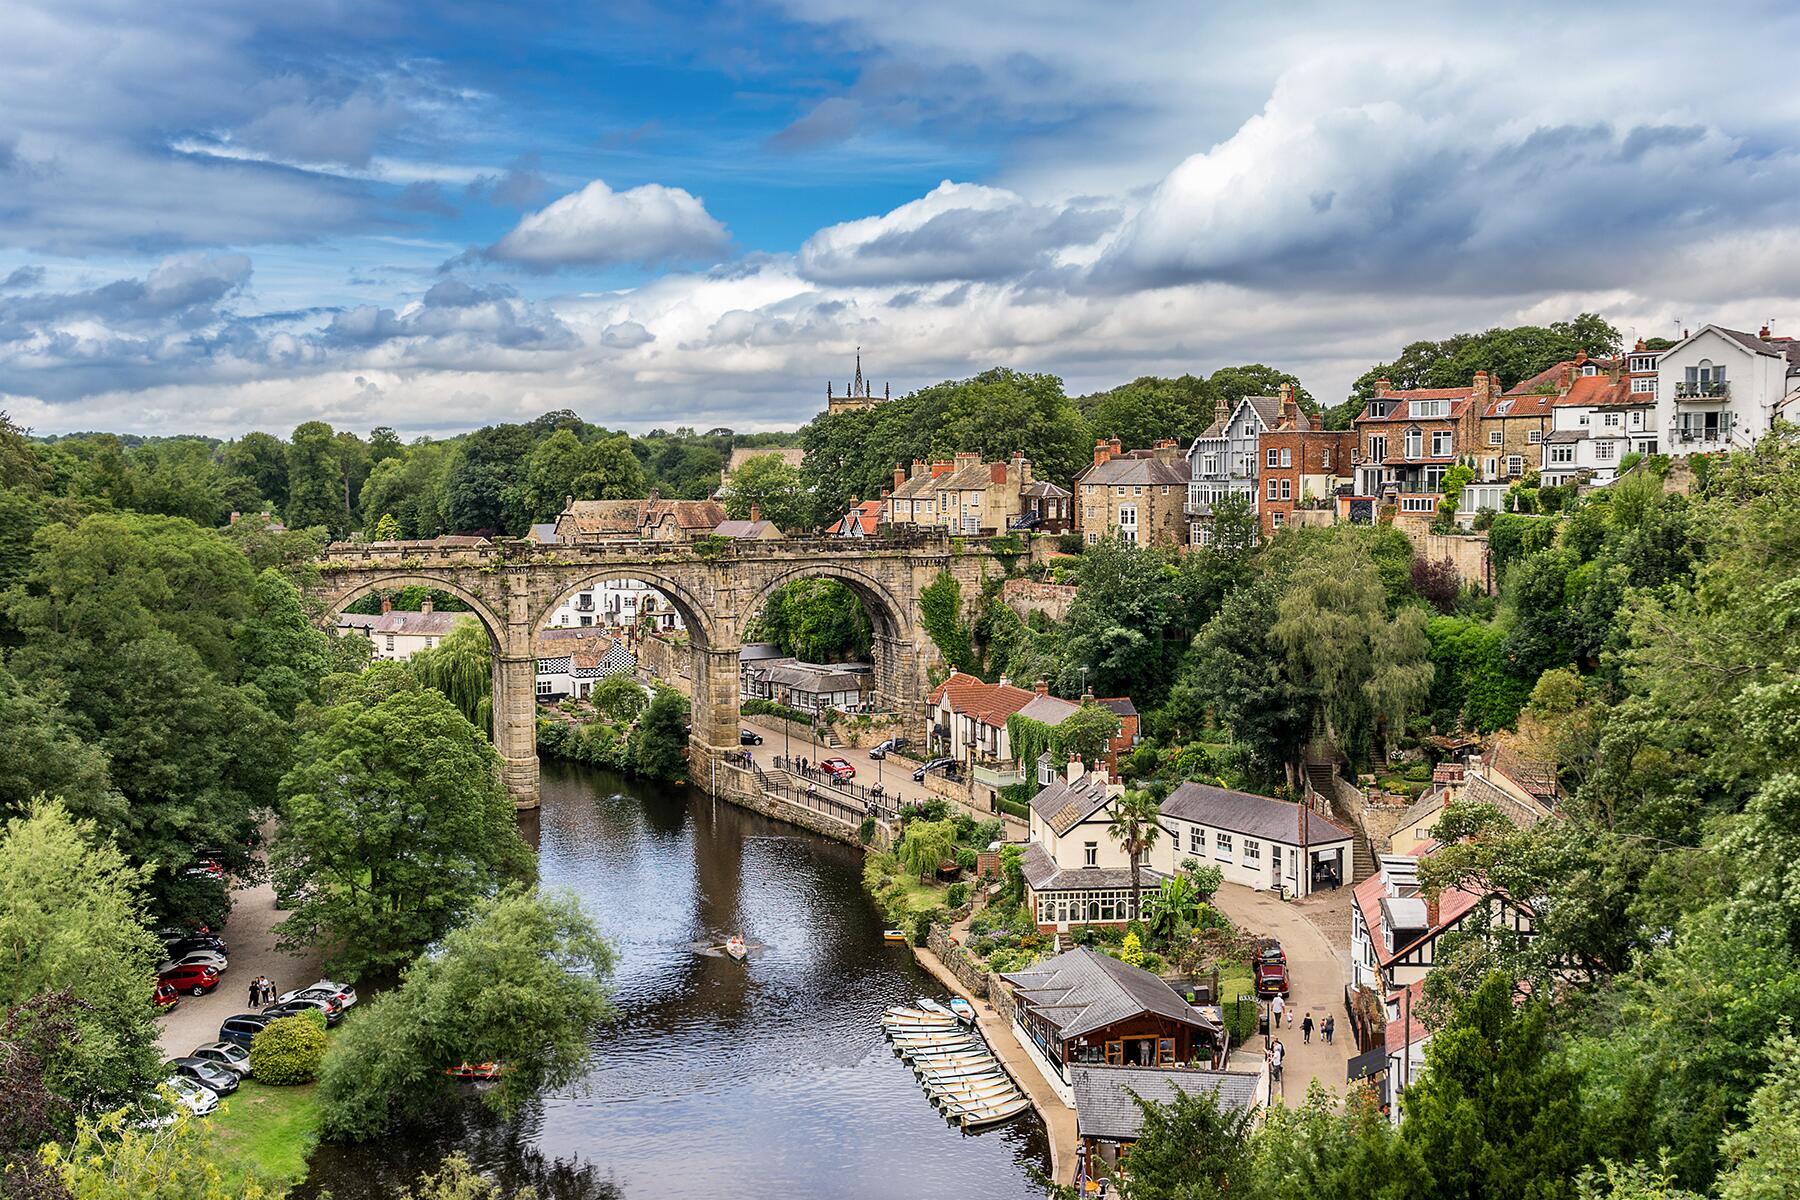 prettiest places to visit england